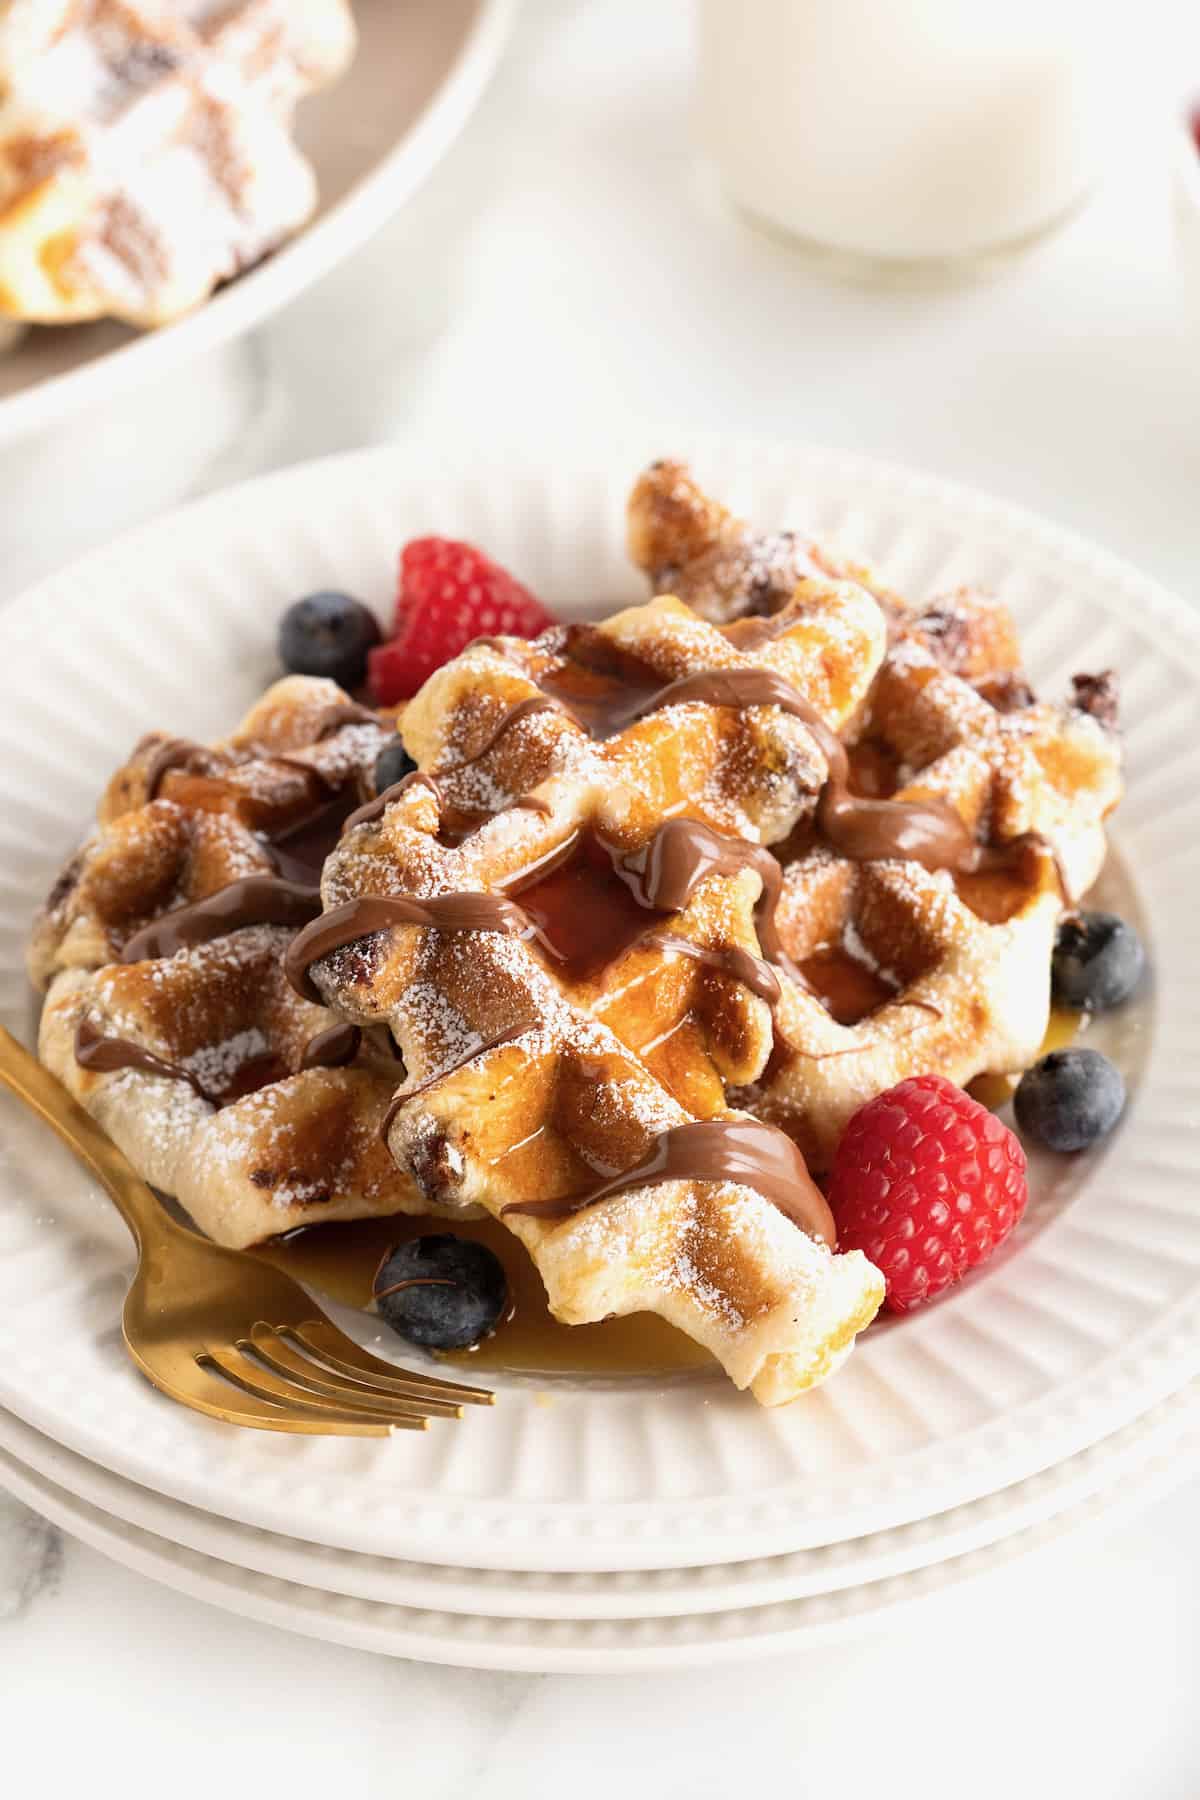 A large white fluted plate with two waffle-textured pastries topped with powdered sugar, maple syrup, a Nutella drizzle, blueberries and strawberries.